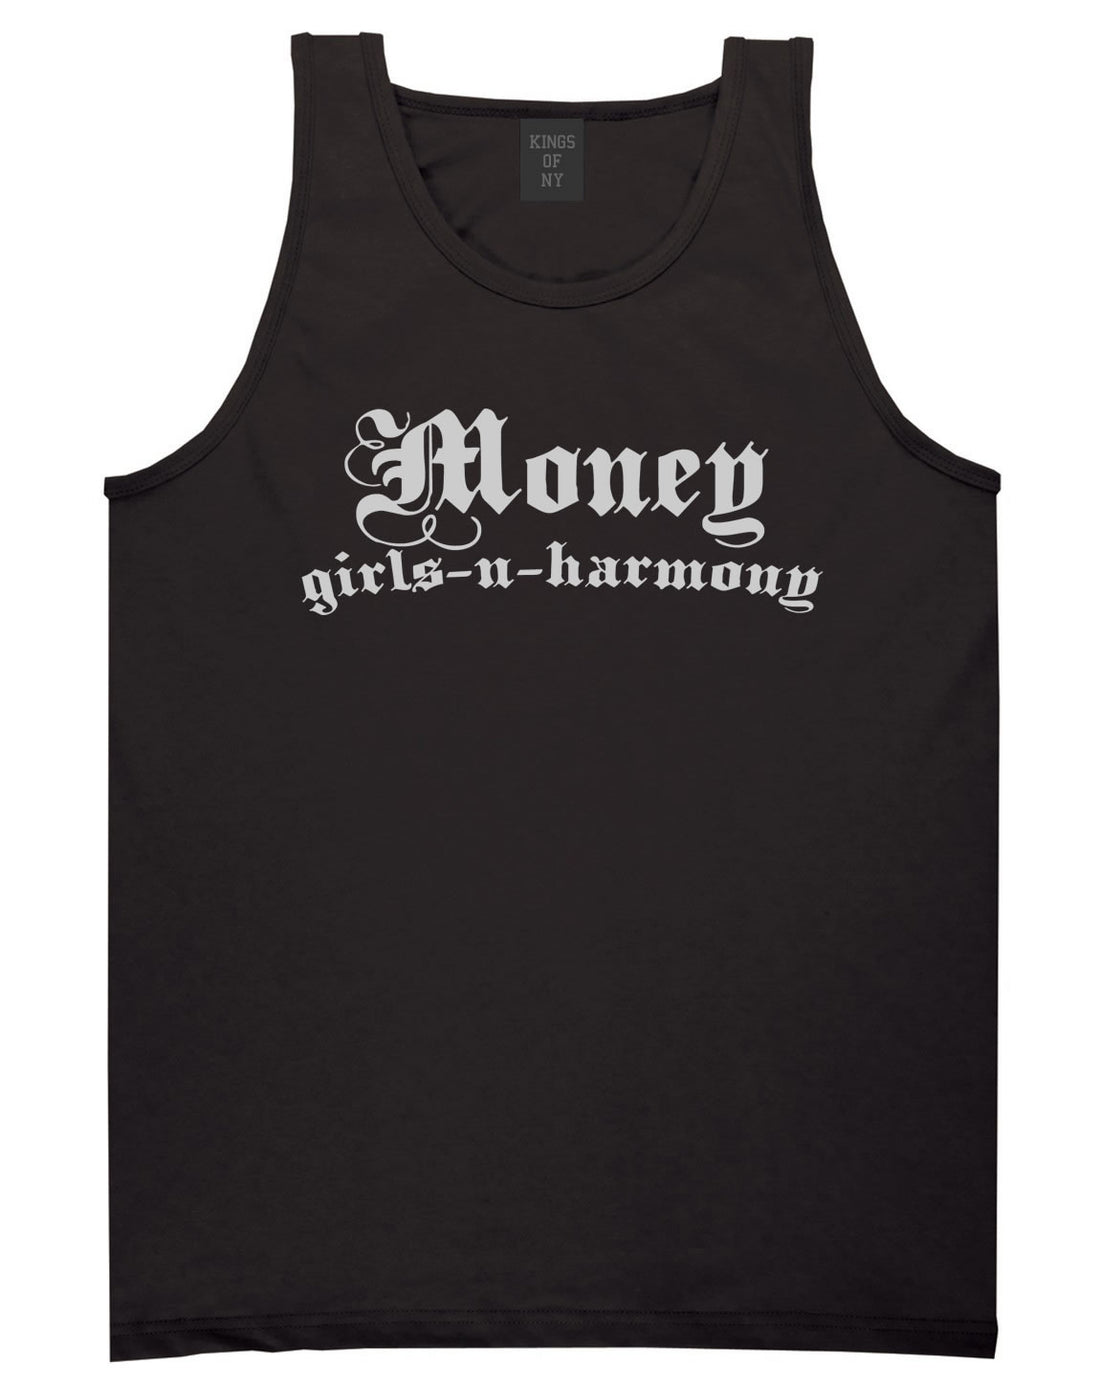 Money Girls And Harmony Tank Top in Black By Kings Of NY